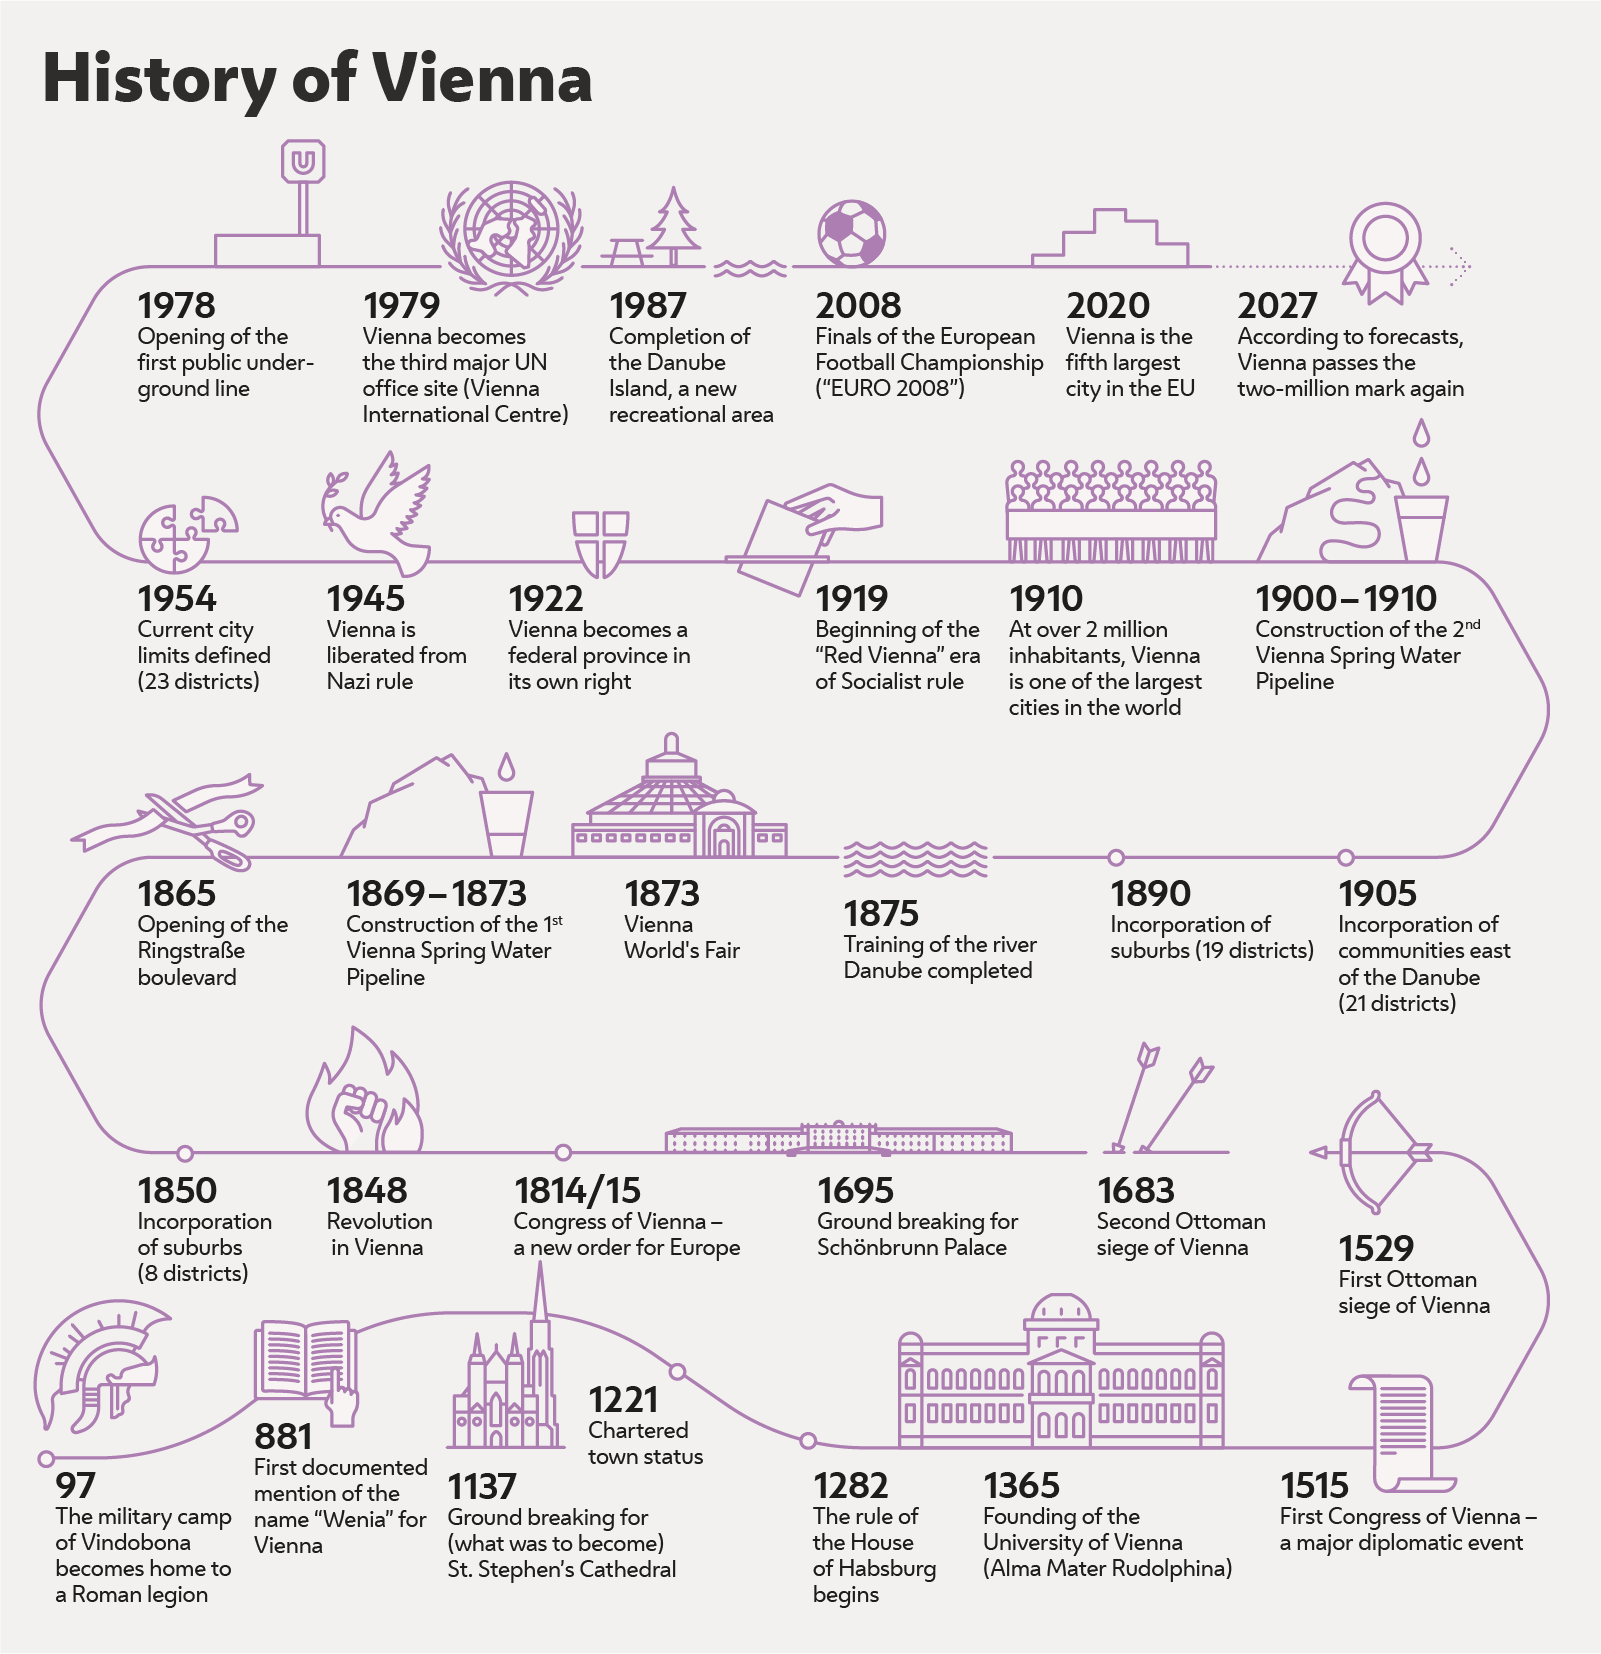 History of Vienna as an illustrated timeline